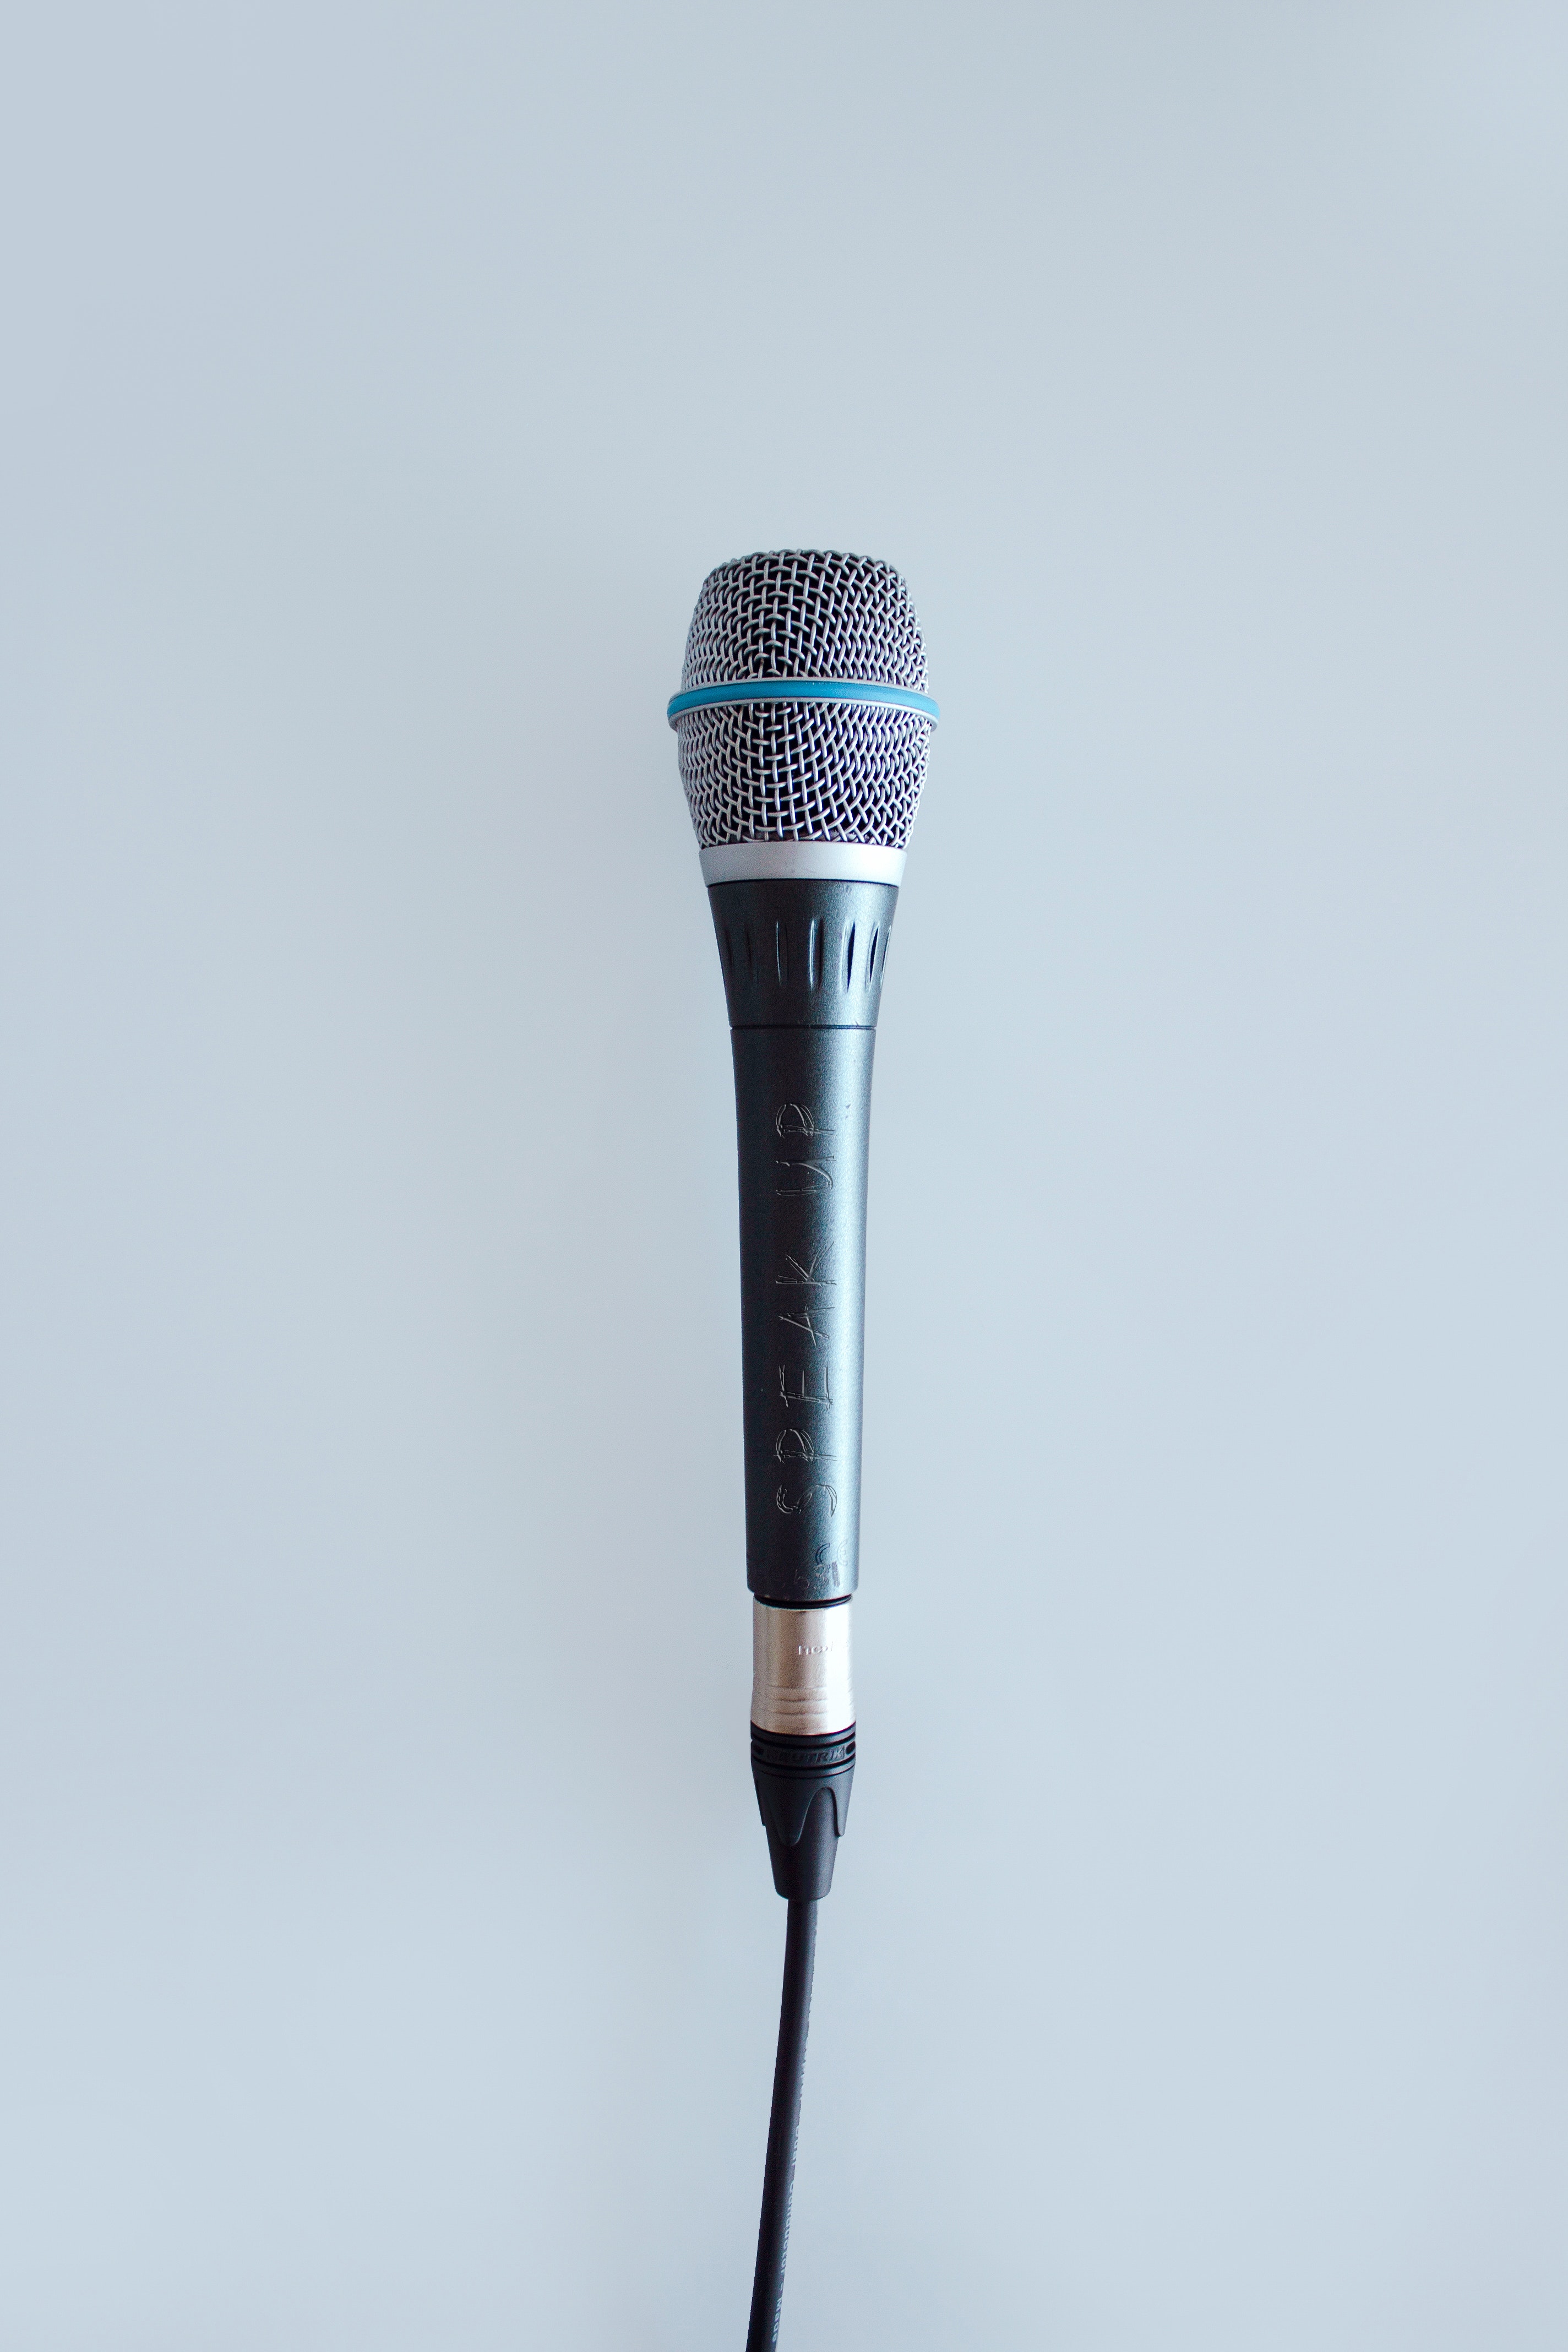 minimalism, wire, microphone, sound mobile wallpaper